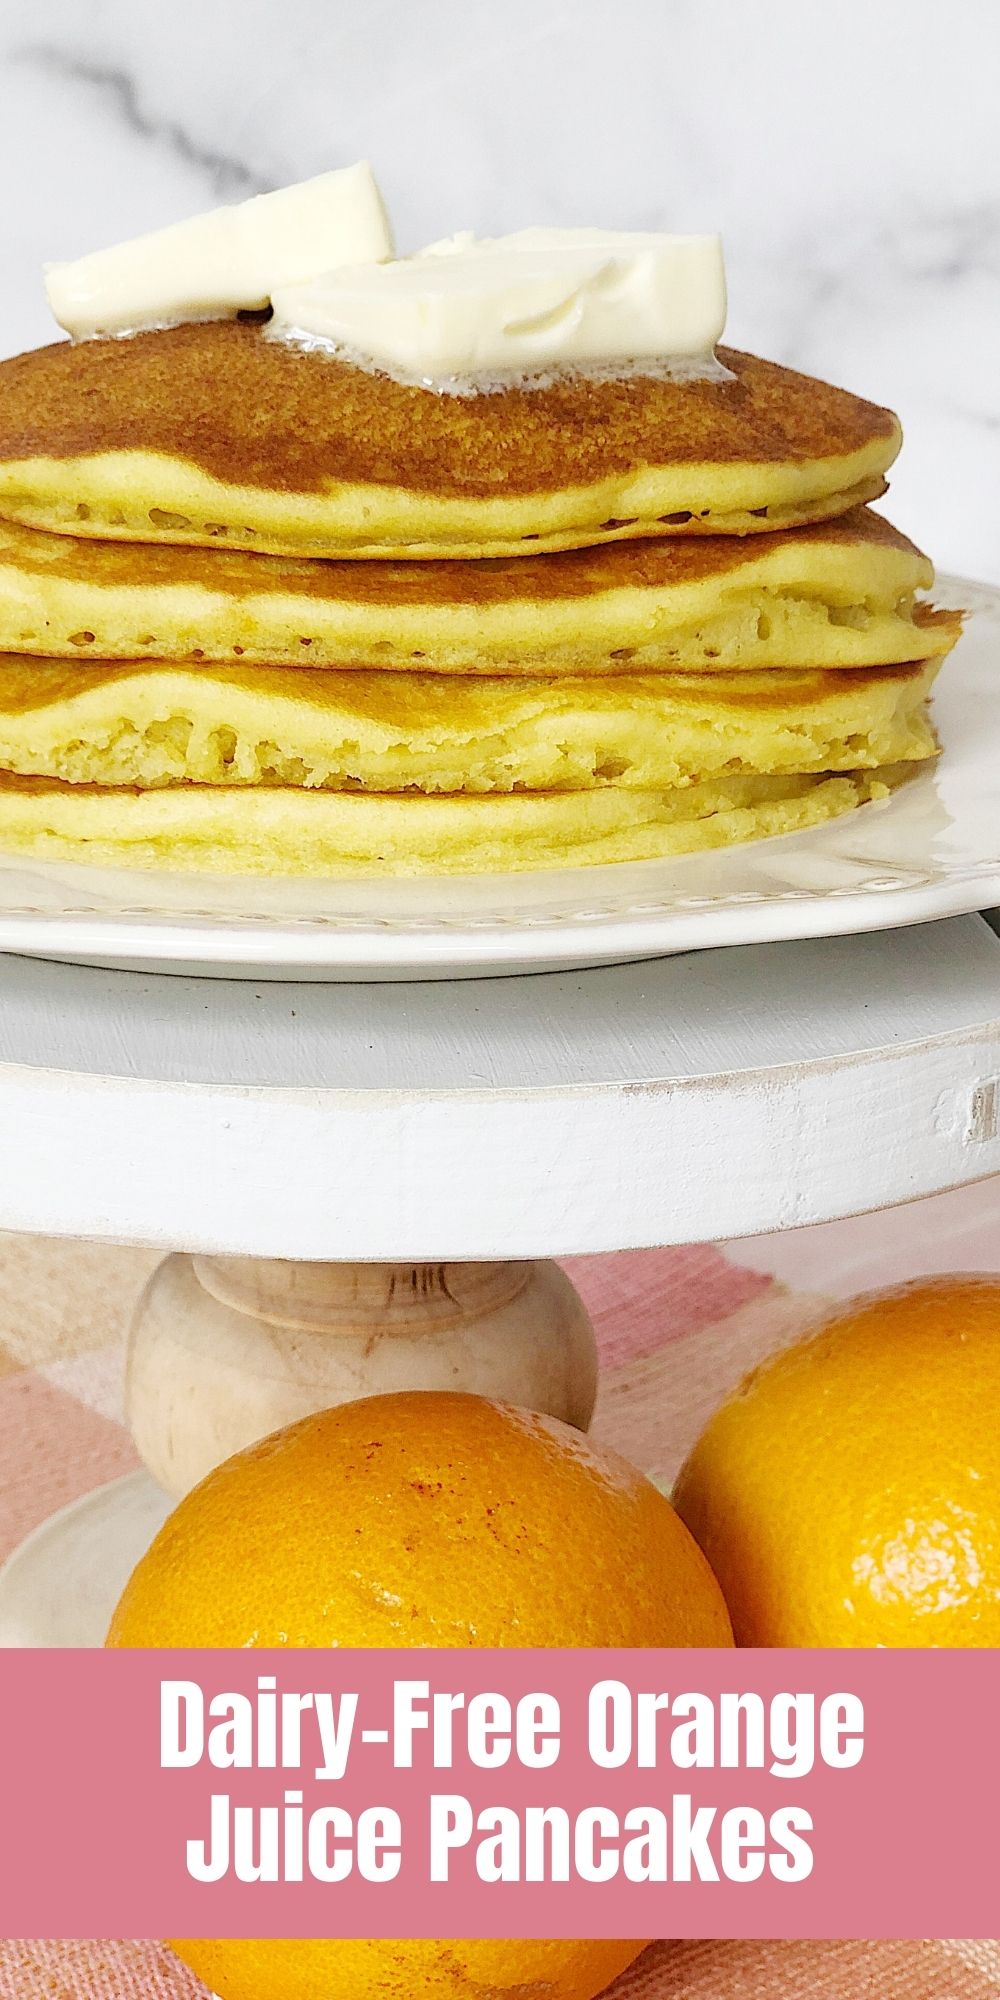 Orange pancakes are so delicious and I have enjoyed them for many years. Making orange juice dairy-free pancakes is so simple and so fulfilling! 